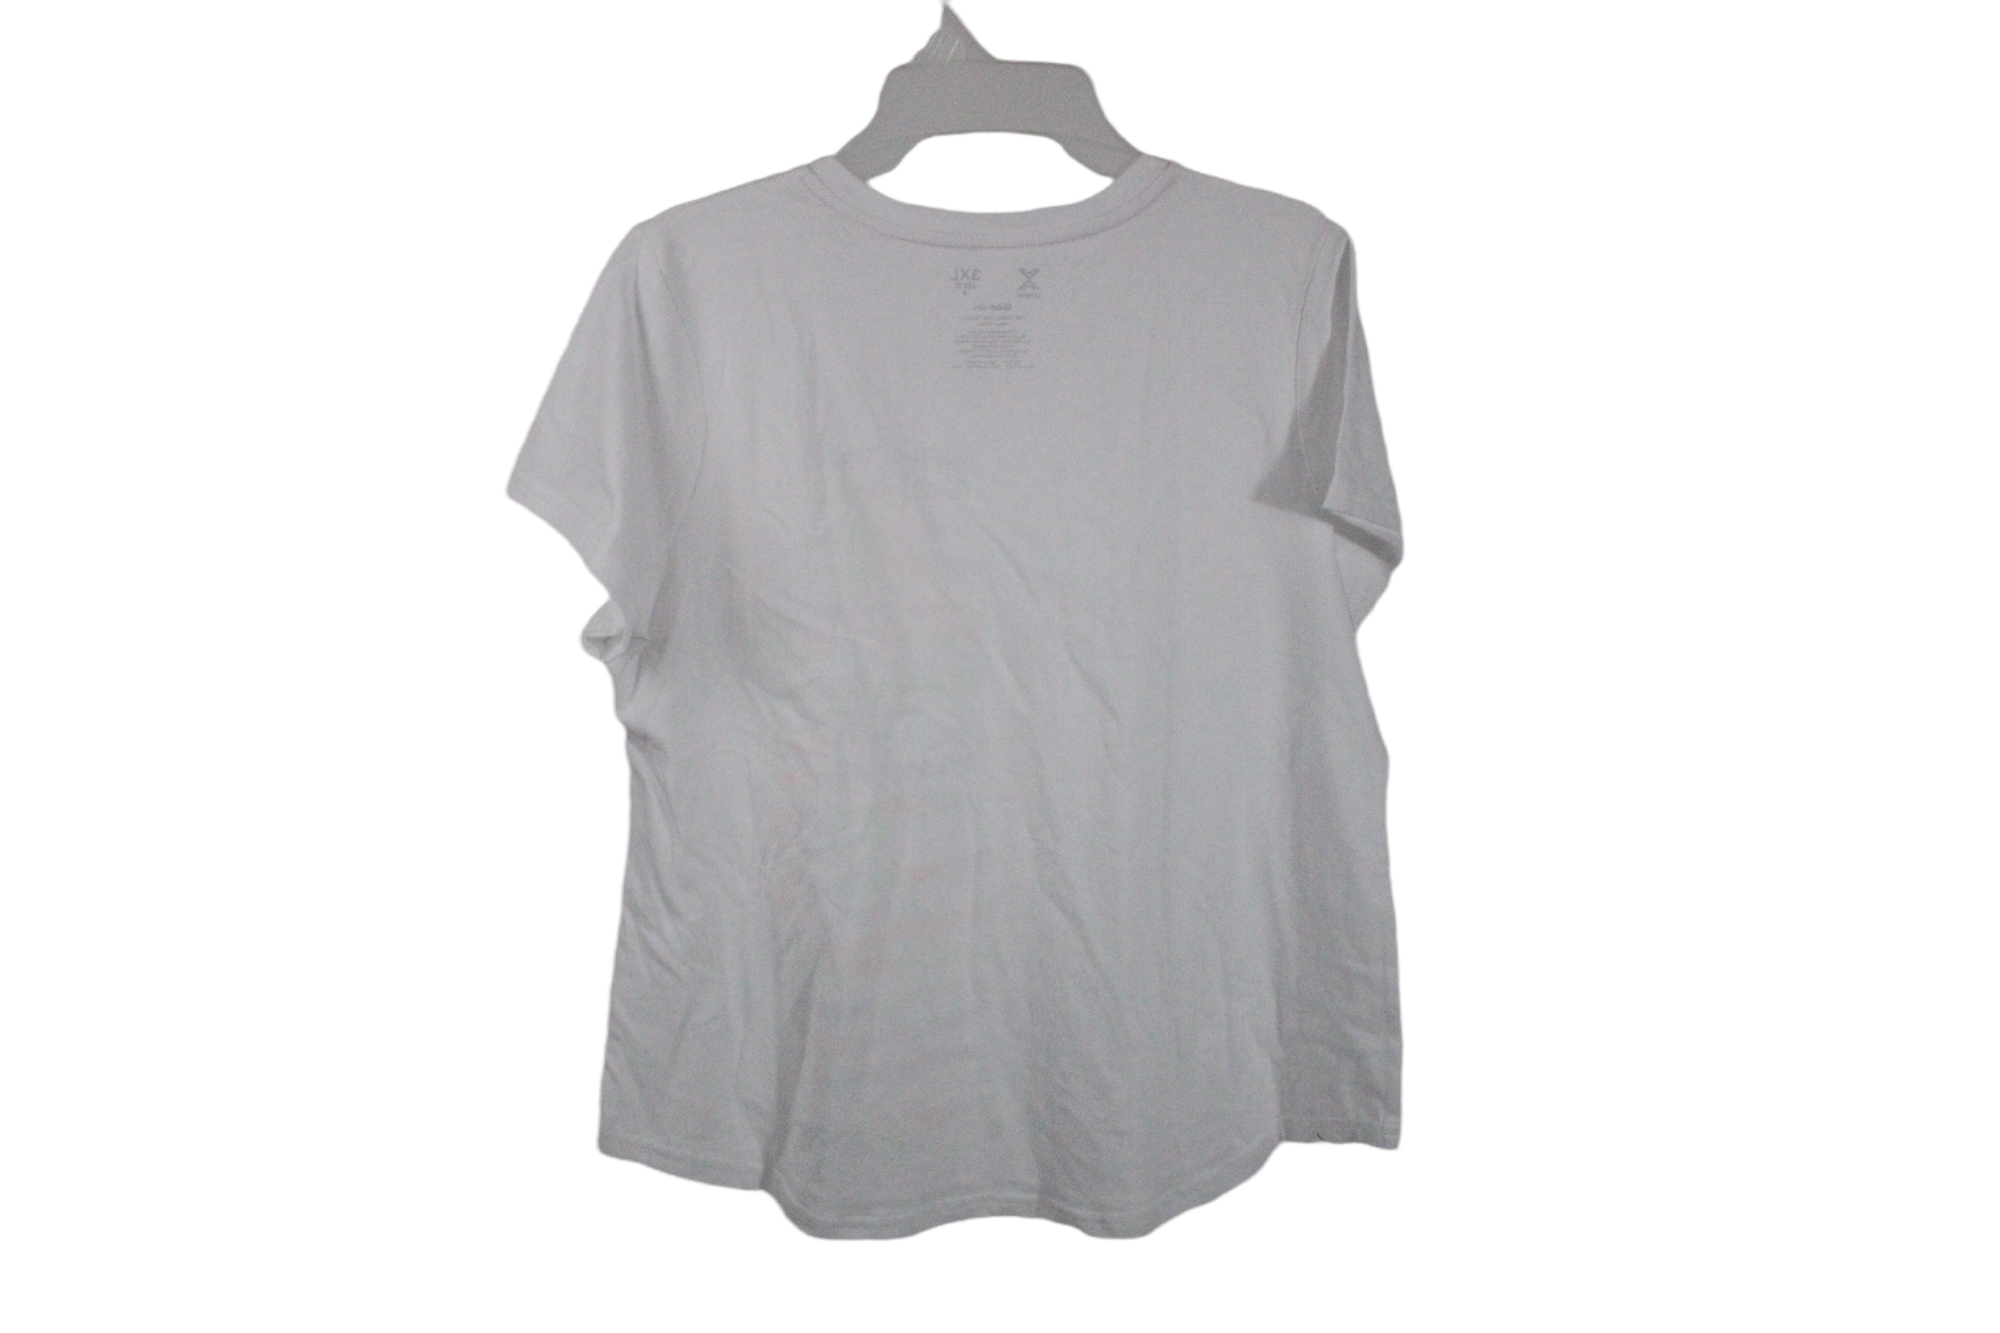 Xersion Quick-Dri "Unstoppable" White Top | Youth 3XL